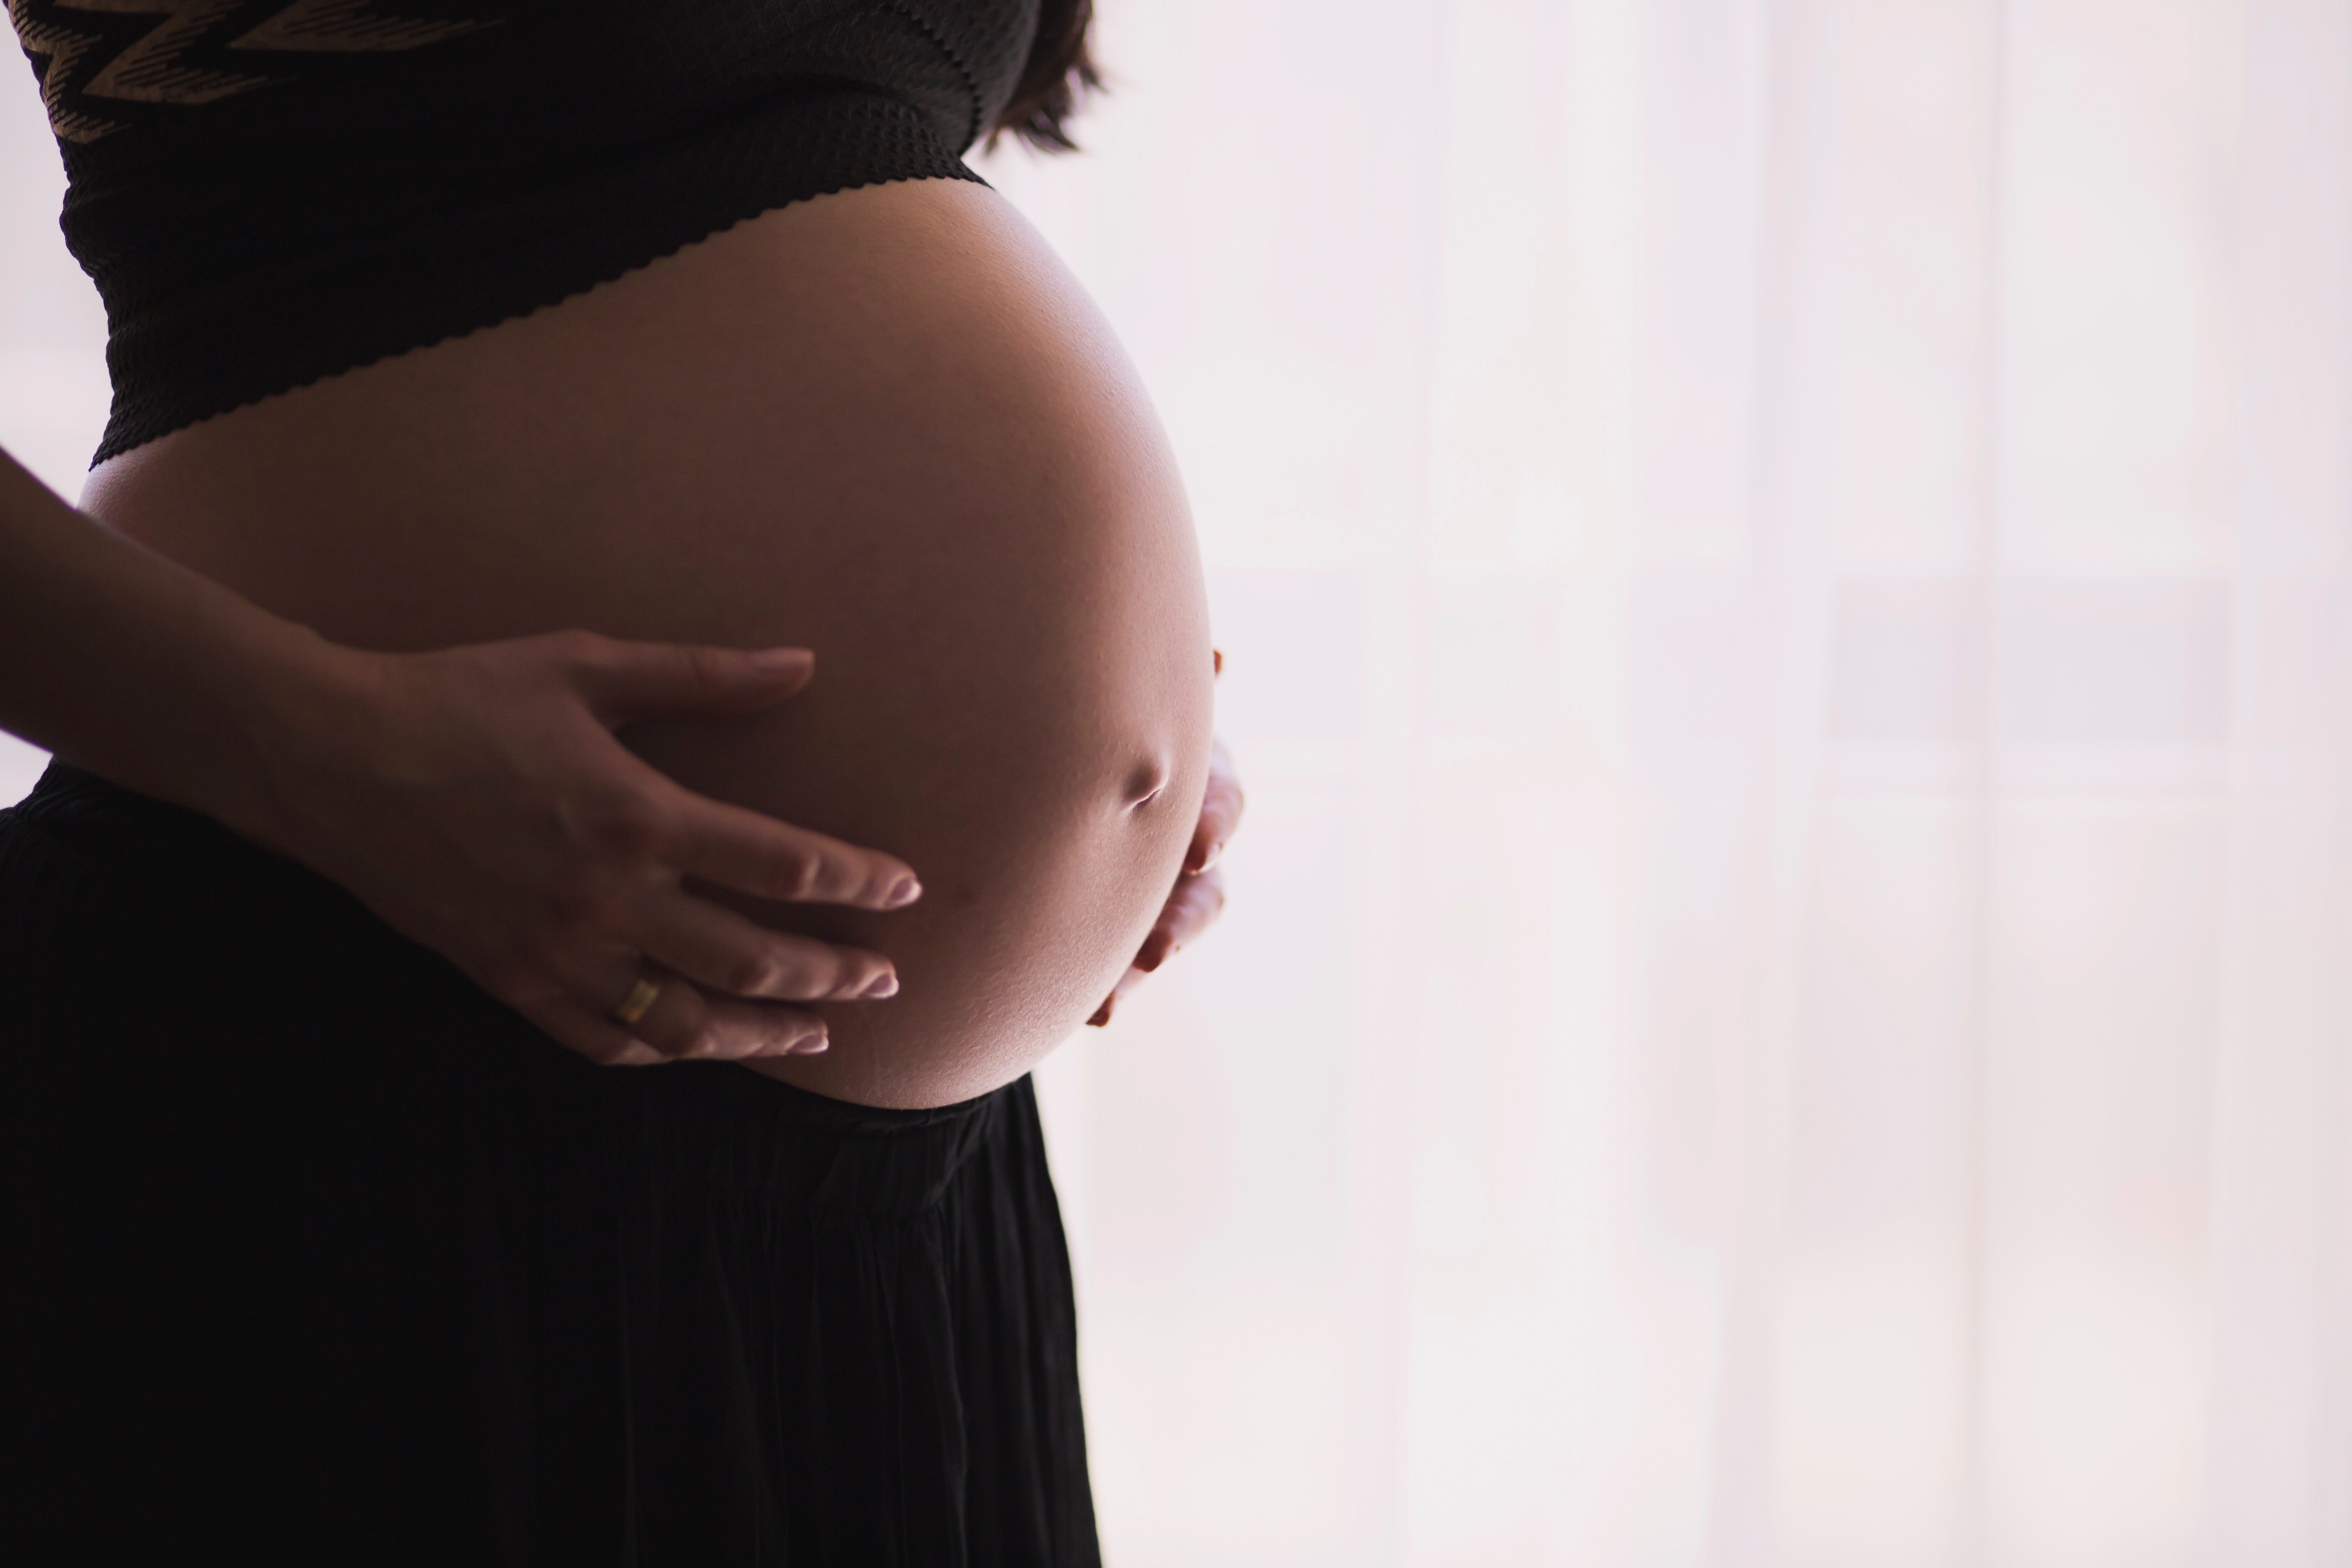 Image of a pregnant woman holding her belly. | Source: Pexels